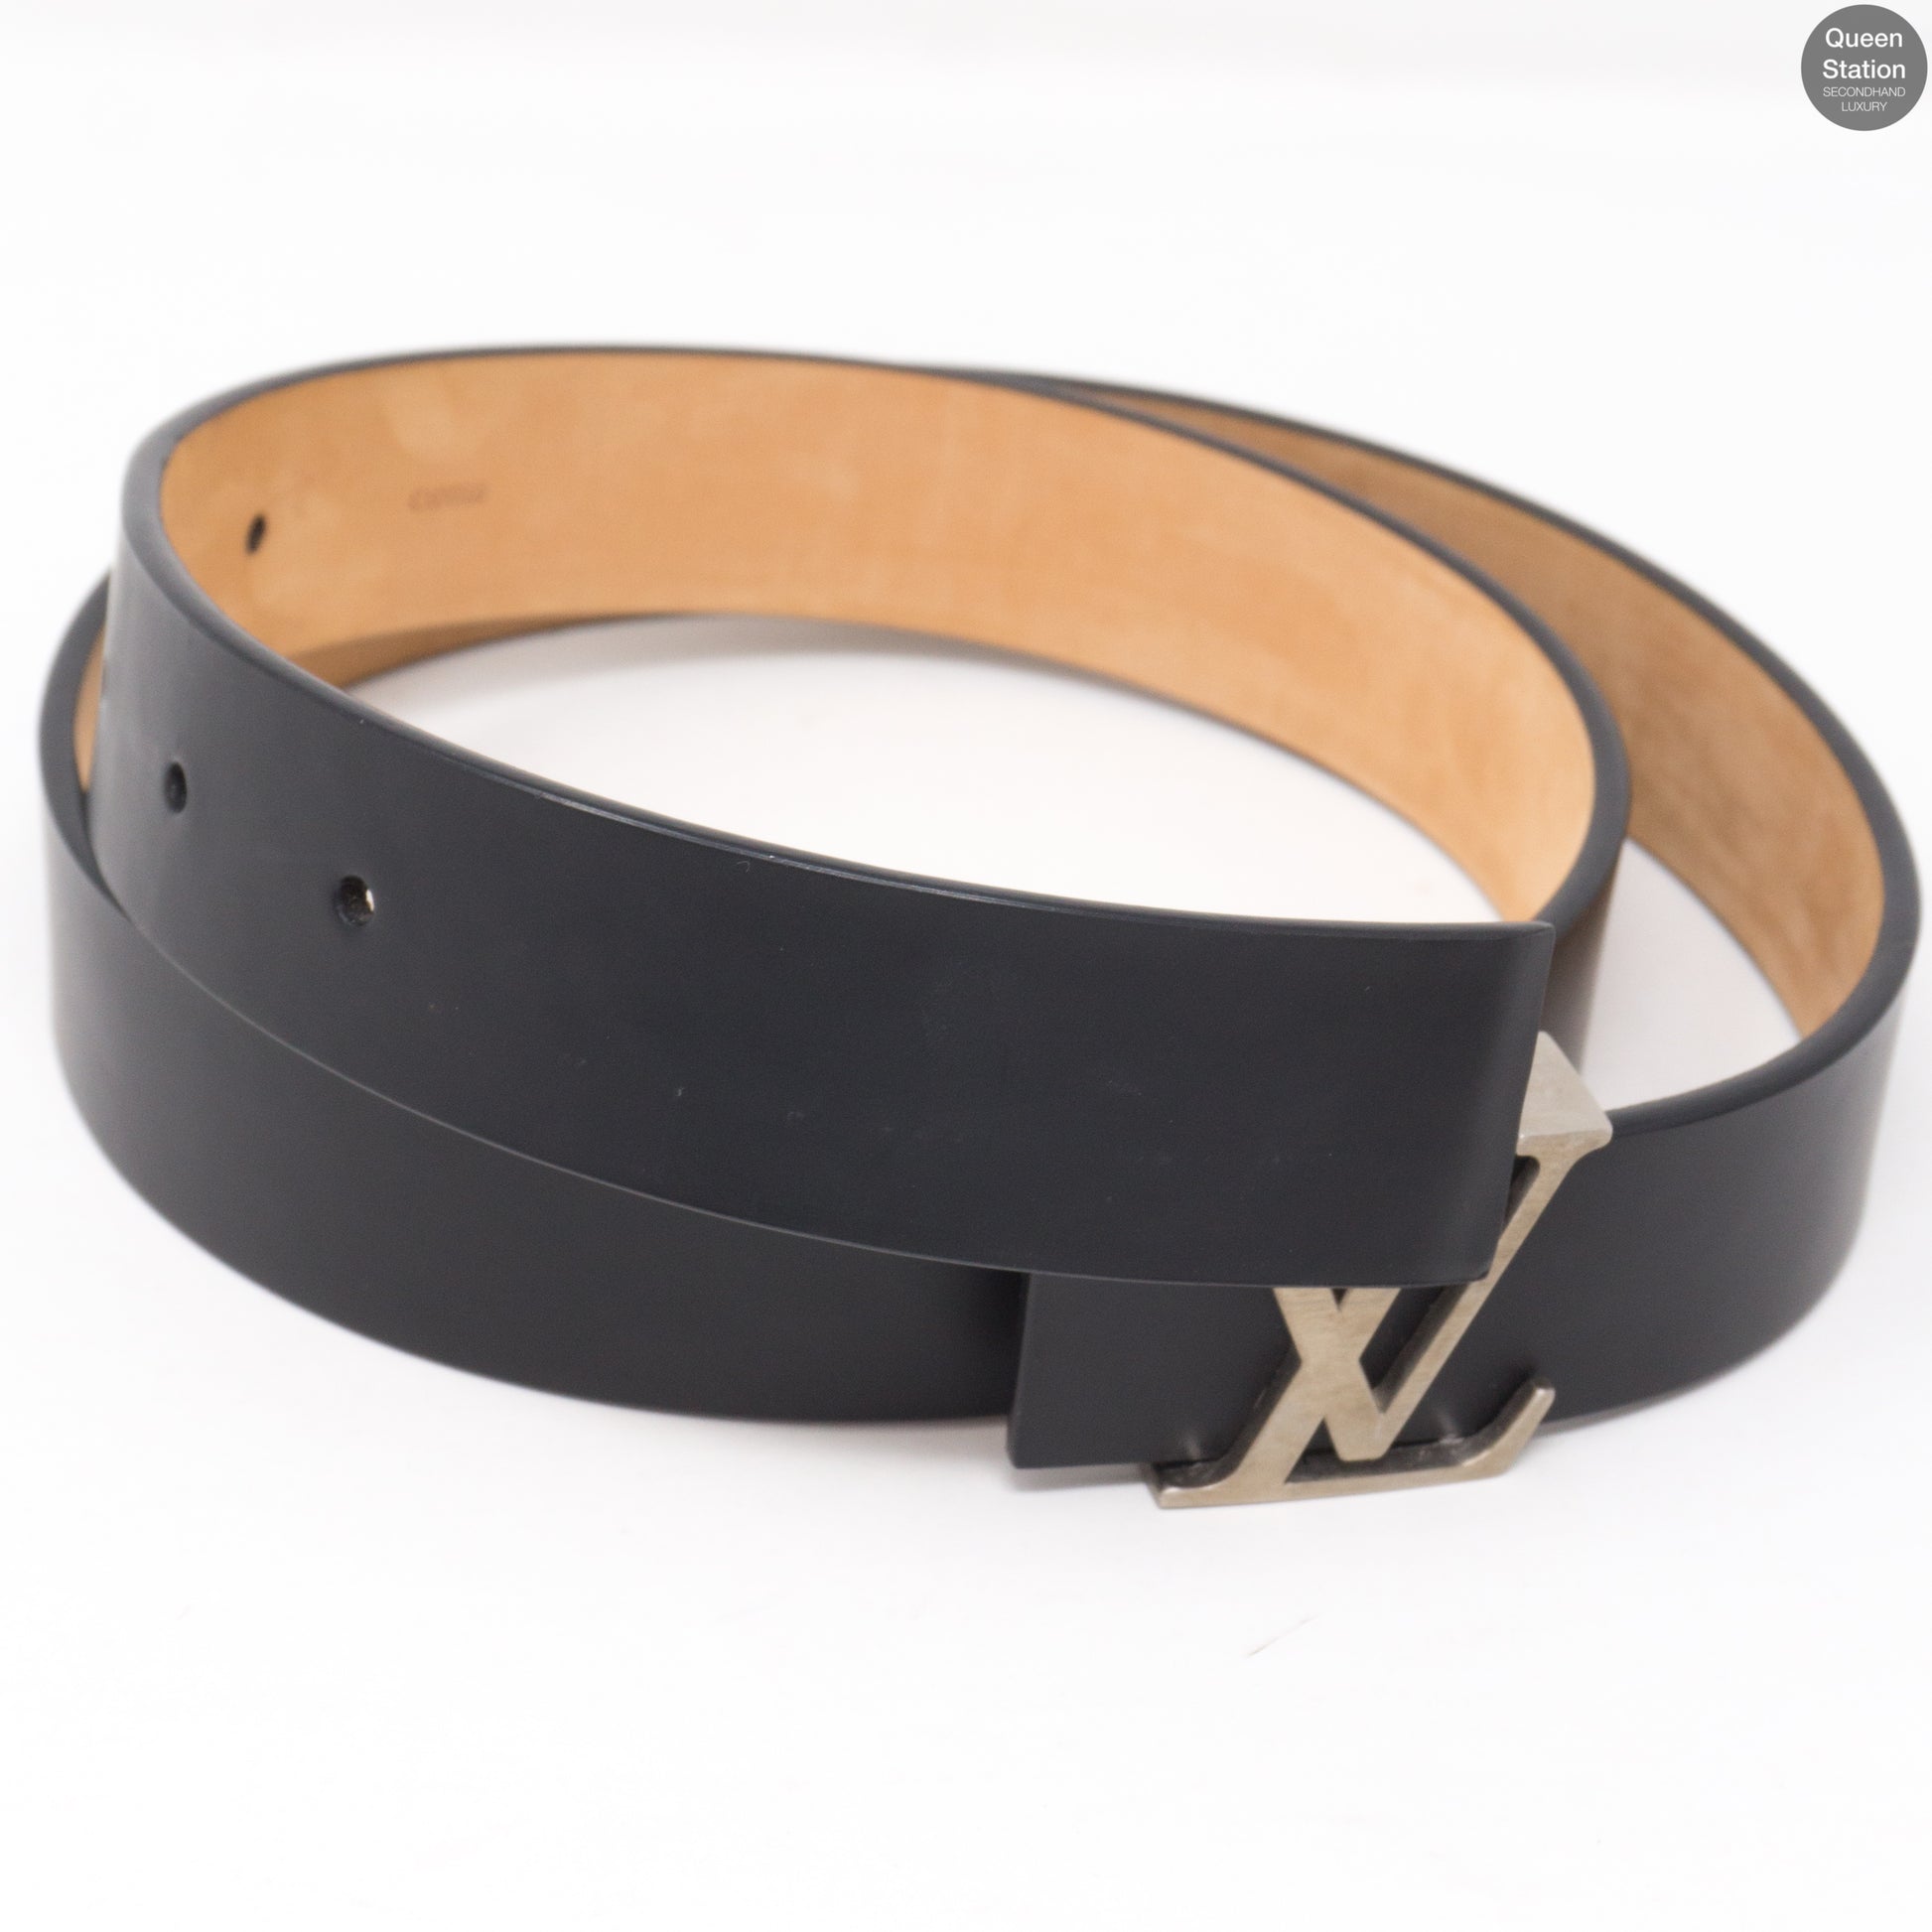 Initiales leather belt Louis Vuitton Black size 85 cm in Leather - 34843287